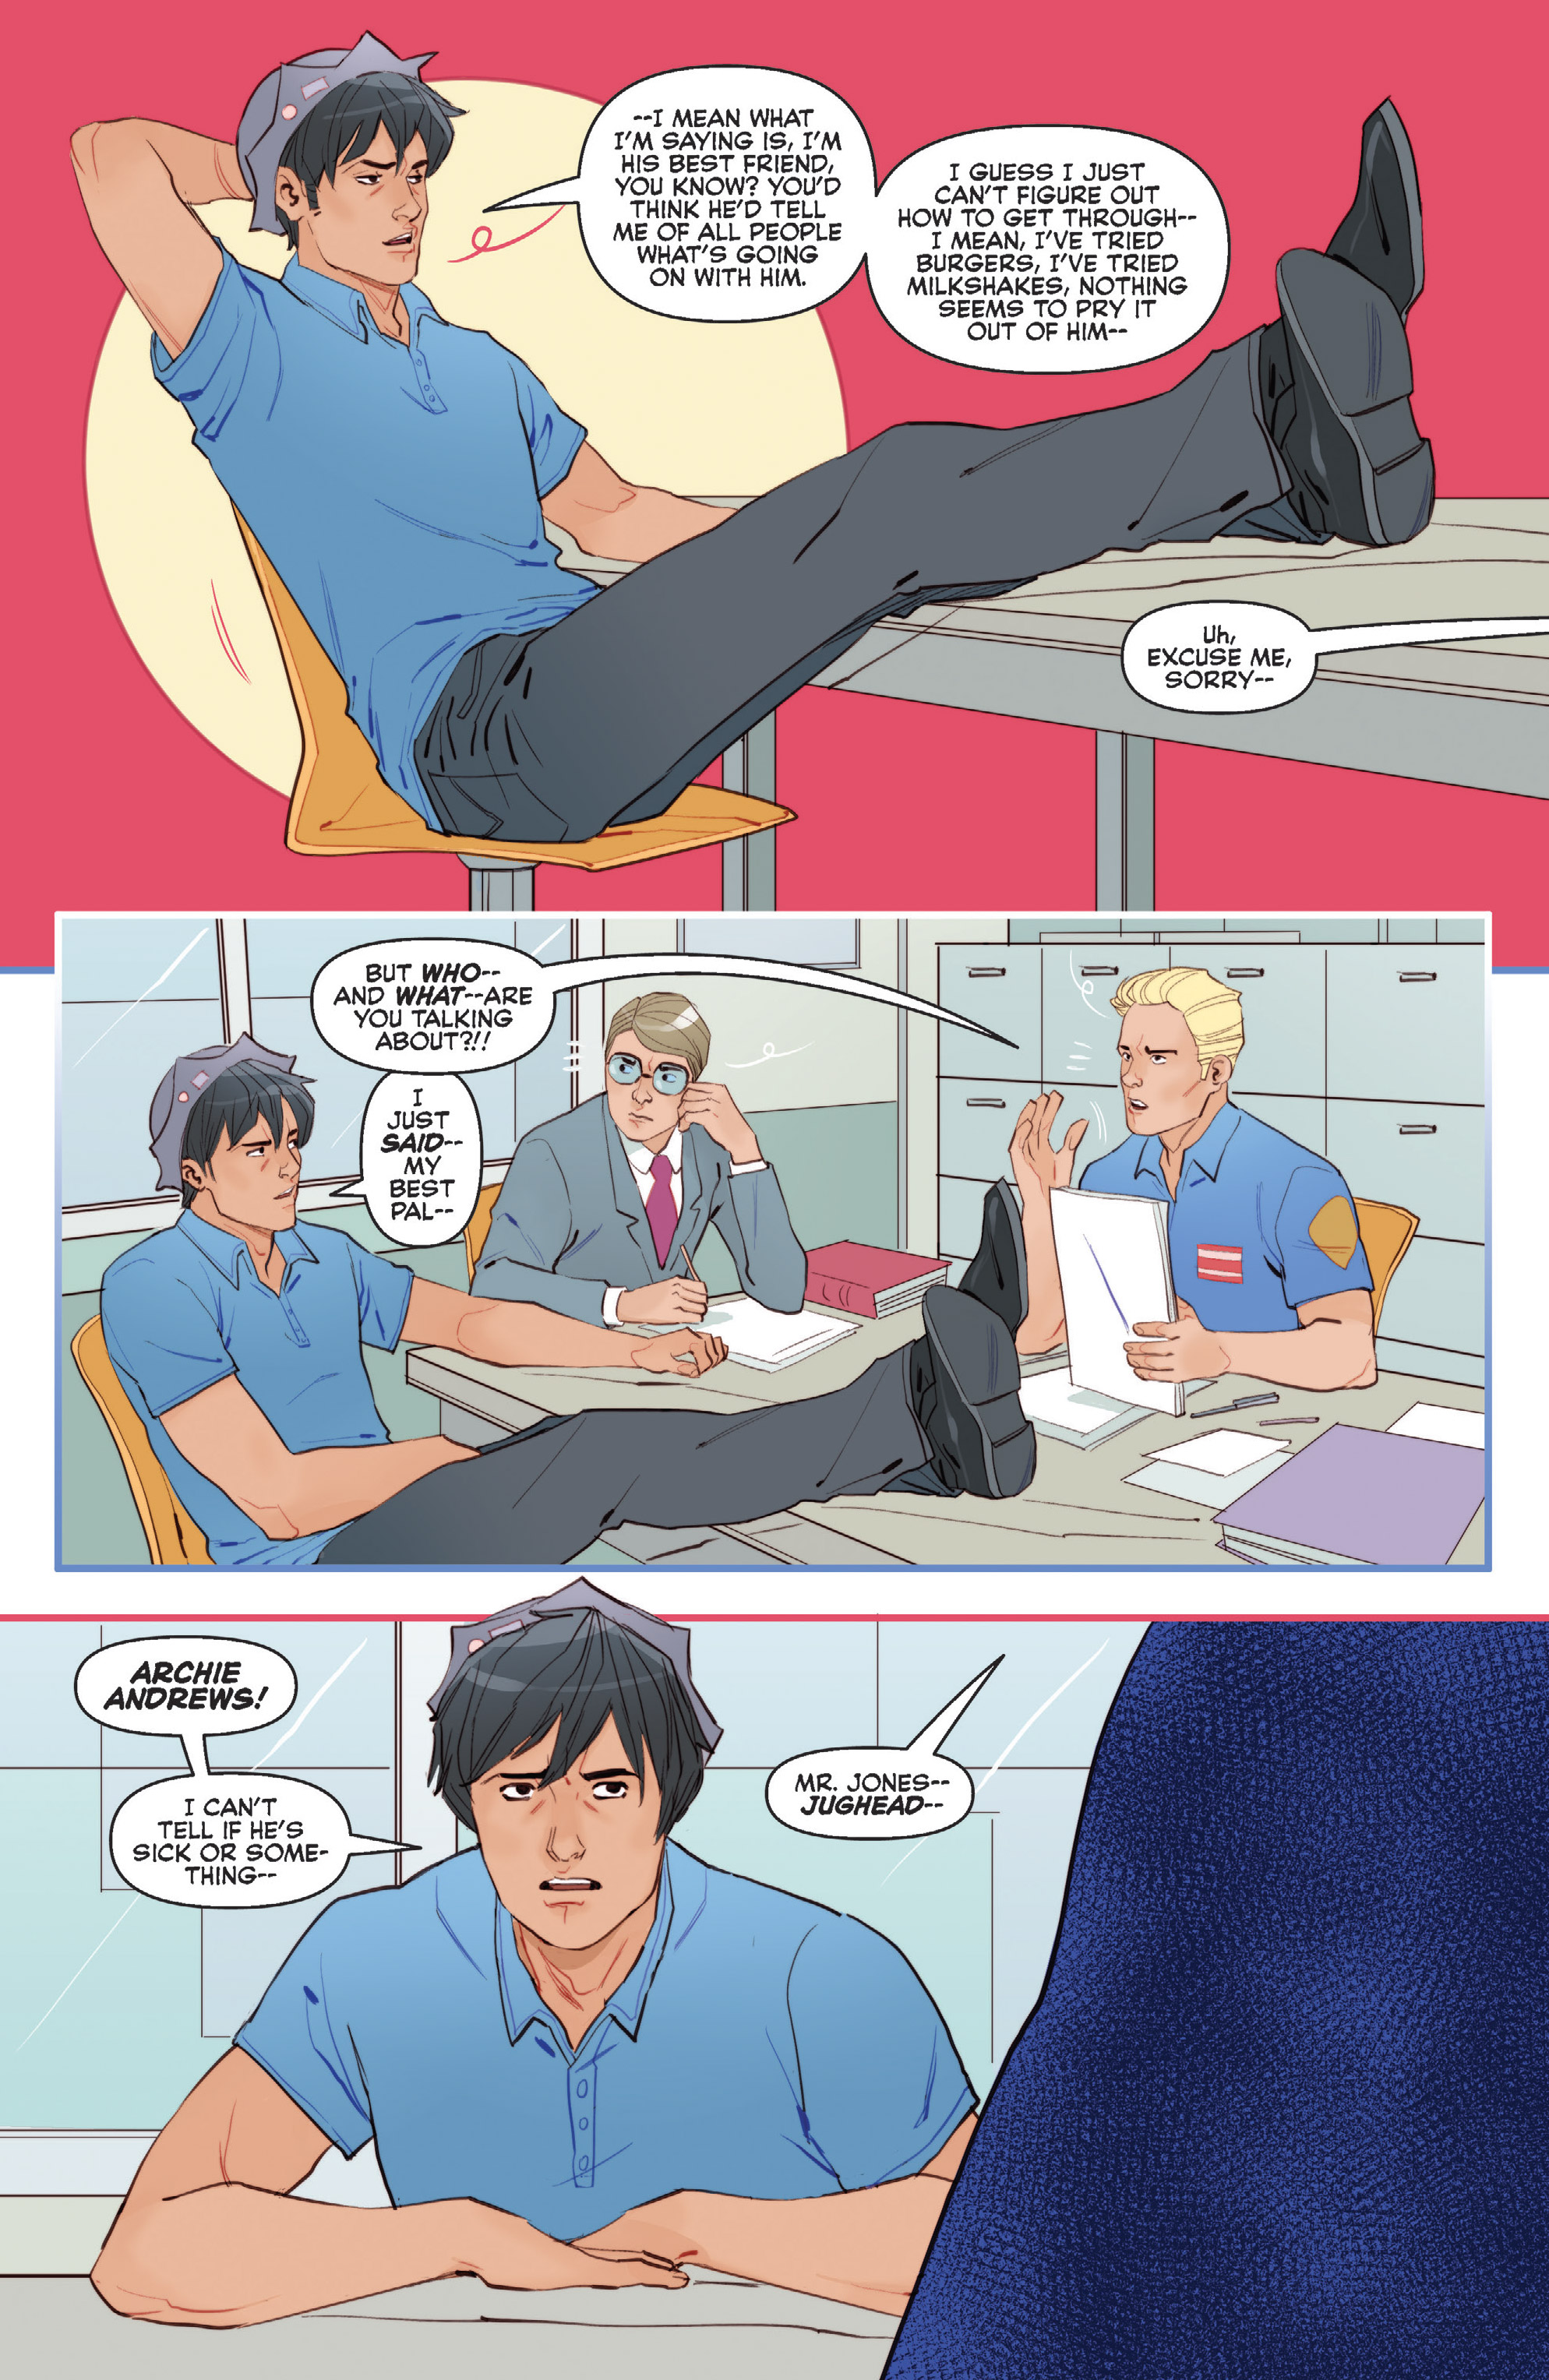 Archie (2015-): Chapter 702 - Page 4